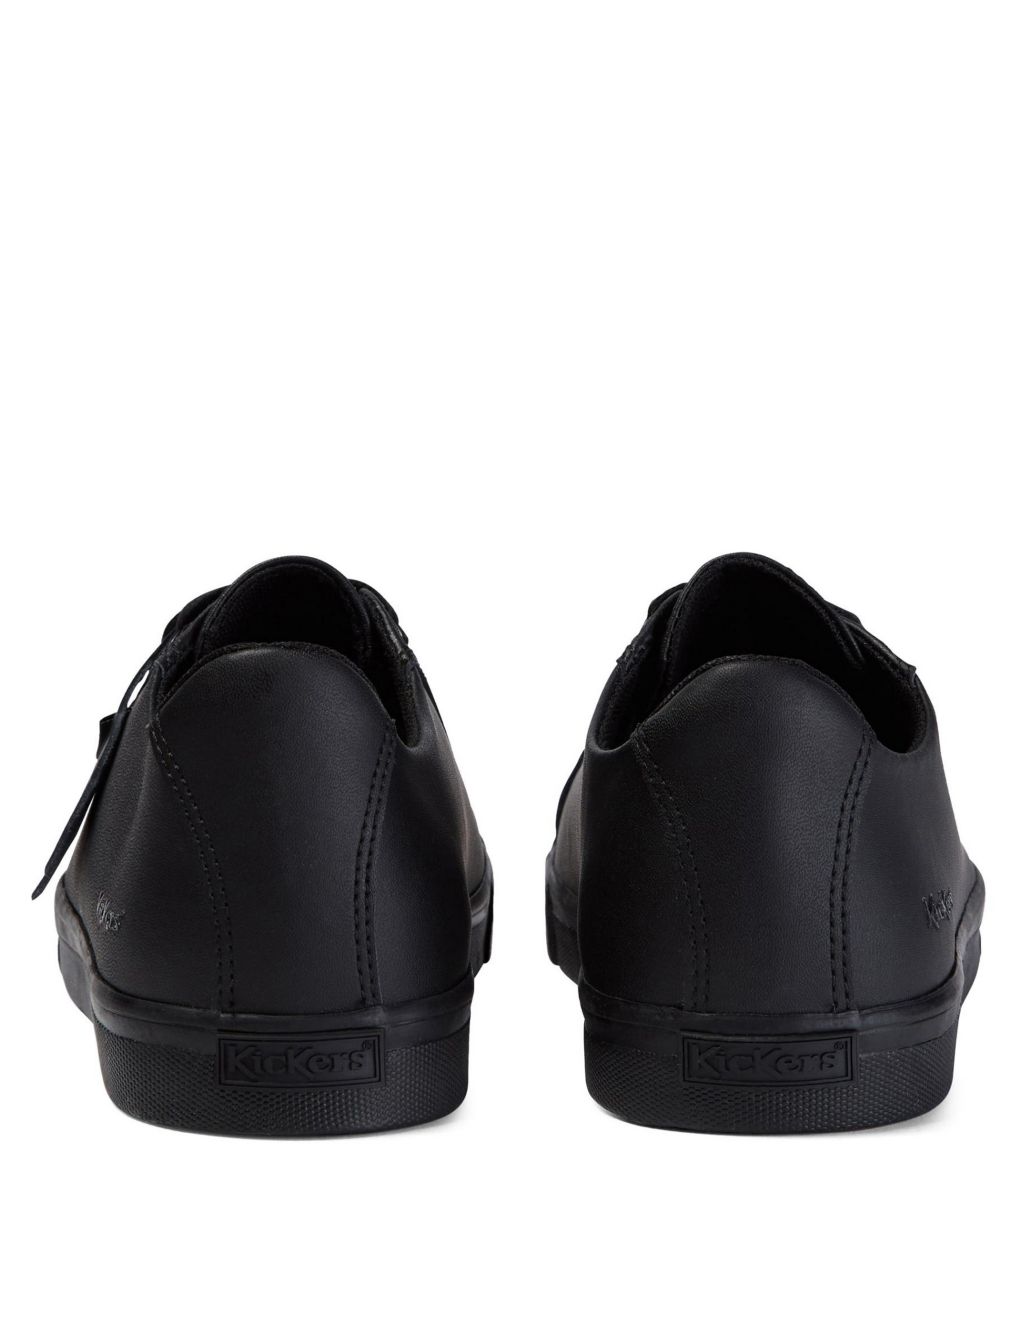 Kids' Leather Lace School Shoes | Kickers | M&S